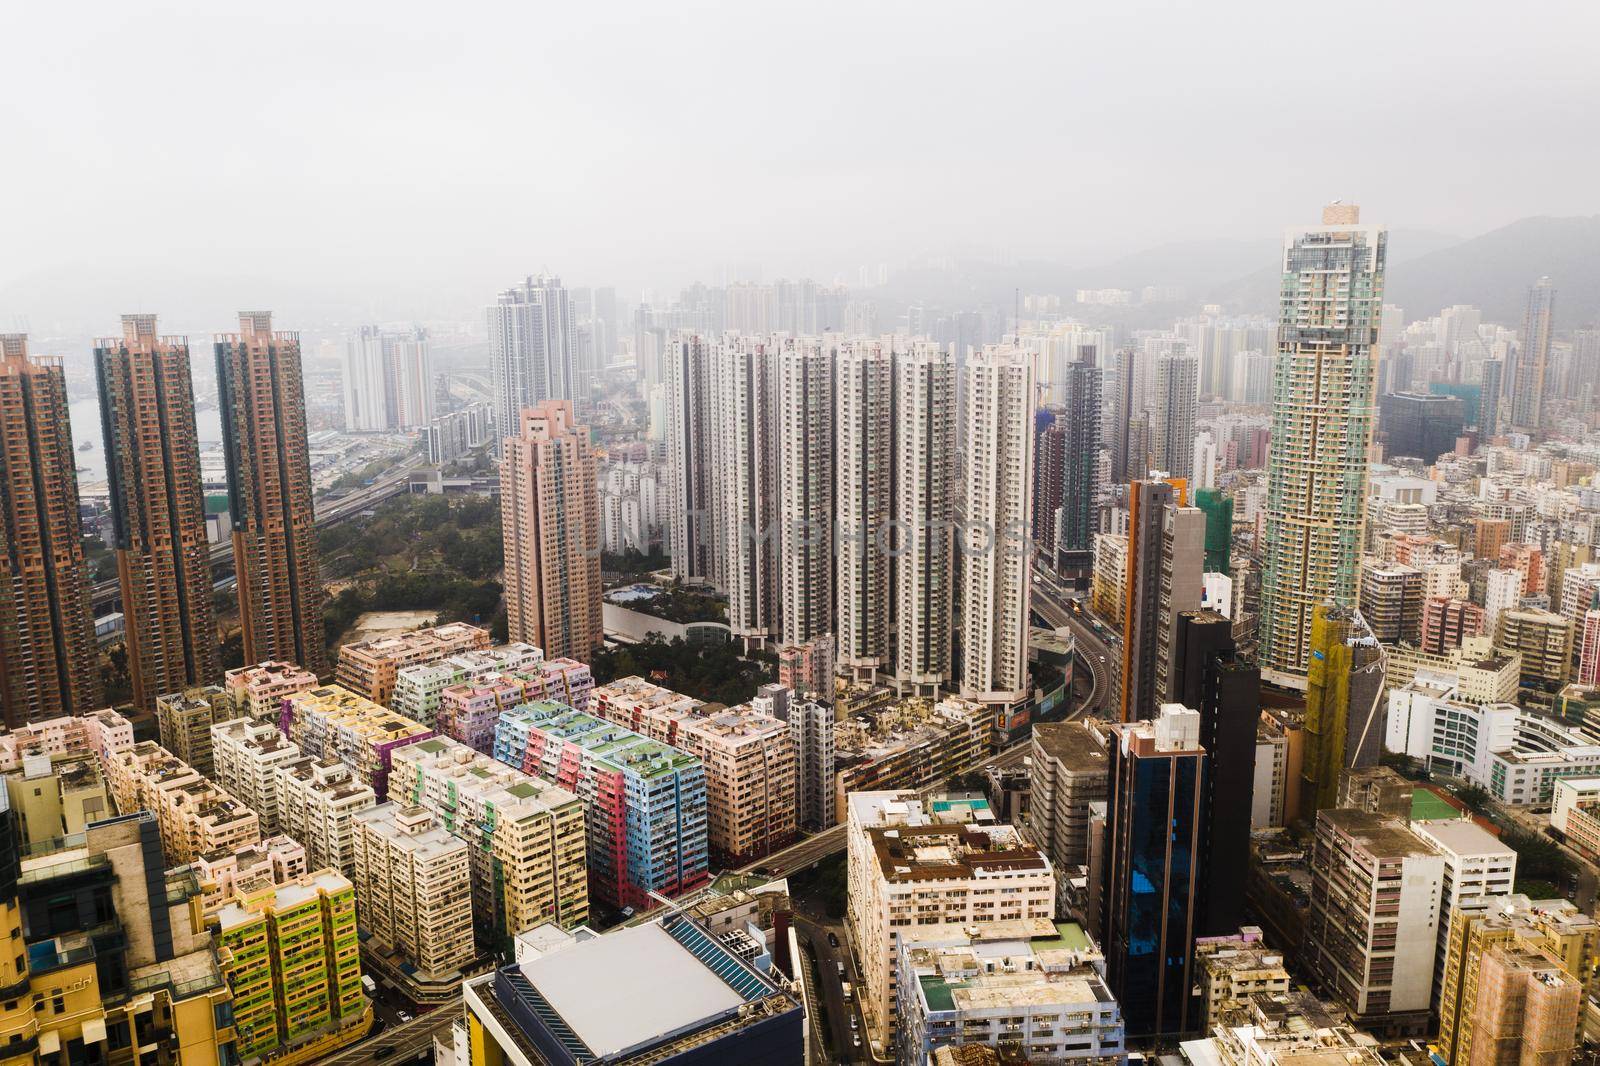 Shot of skyscrapers, office blocks and other commercial buildings in the urban metropolis of Hong Kong.